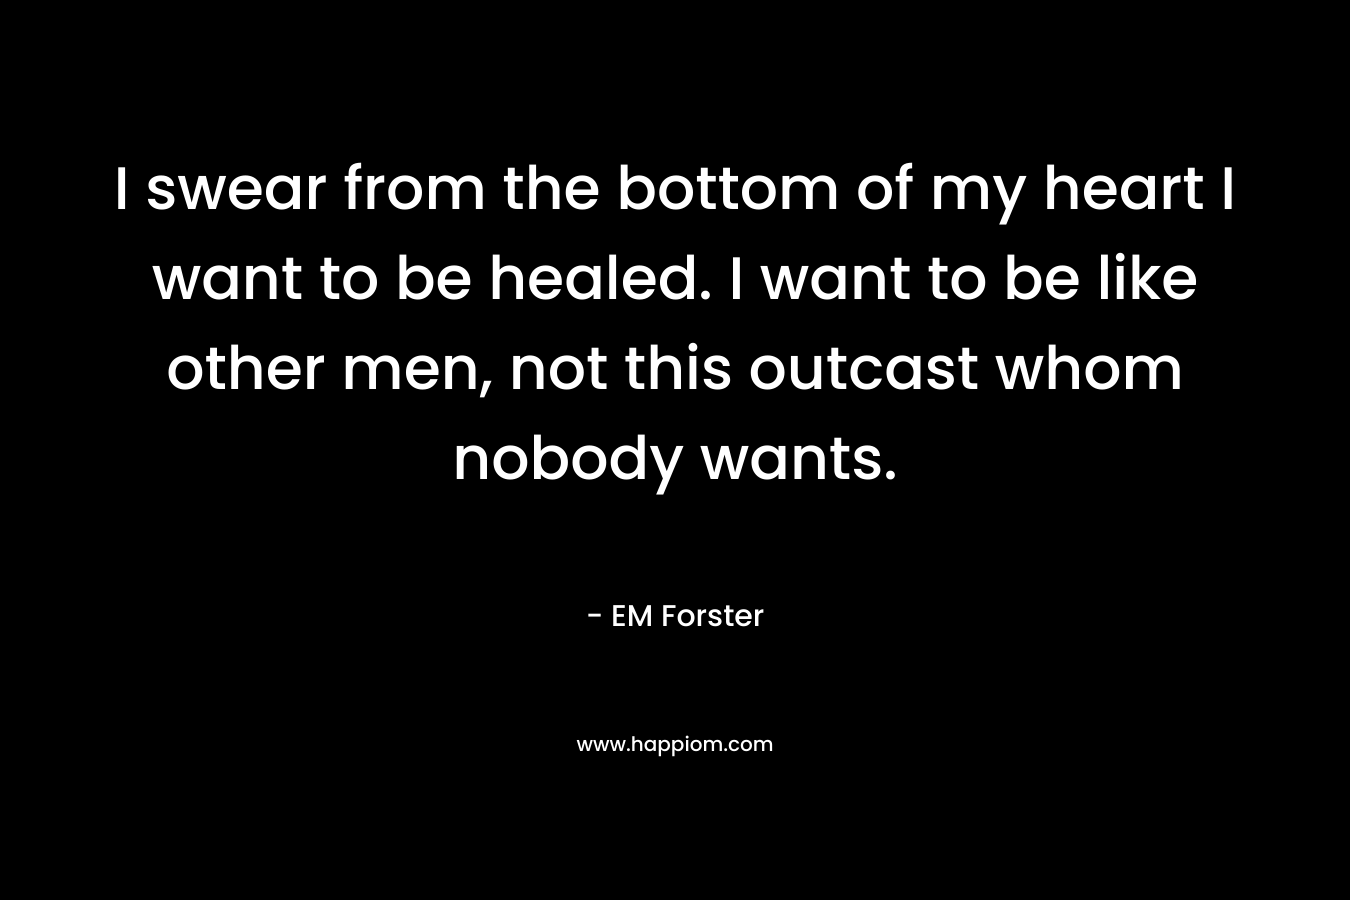 I swear from the bottom of my heart I want to be healed. I want to be like other men, not this outcast whom nobody wants.